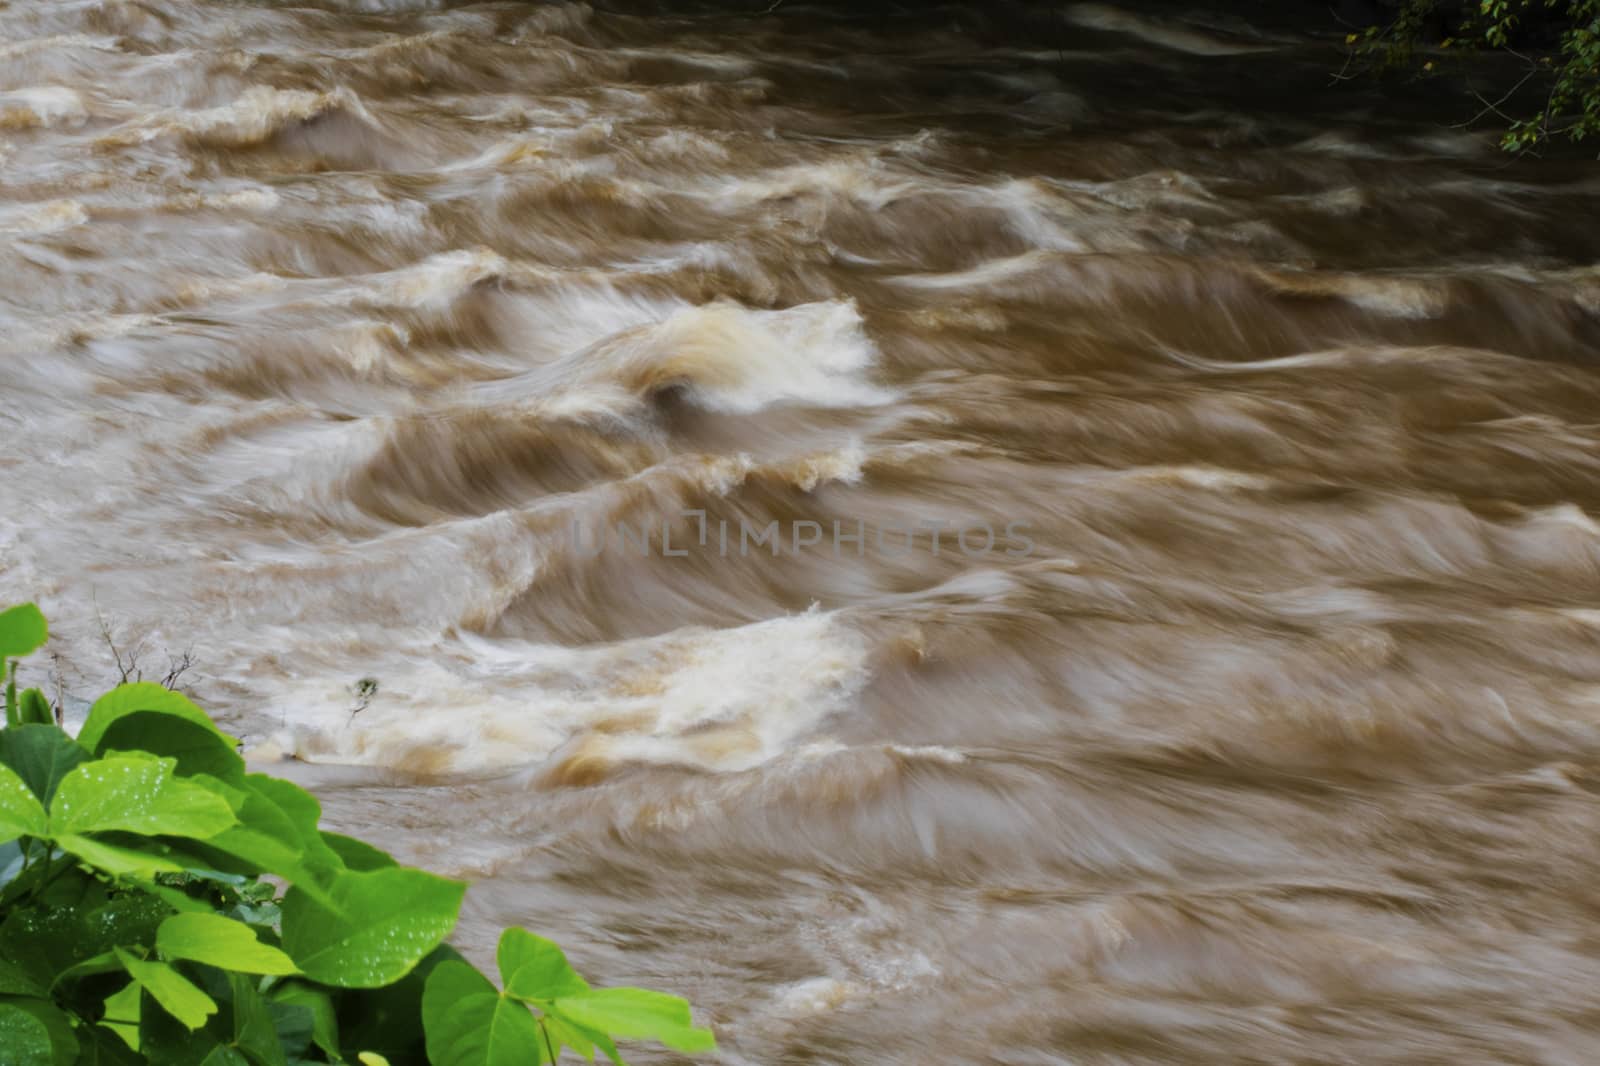 Time-exposure of Standing Waves in Readdies River by CharlieFloyd